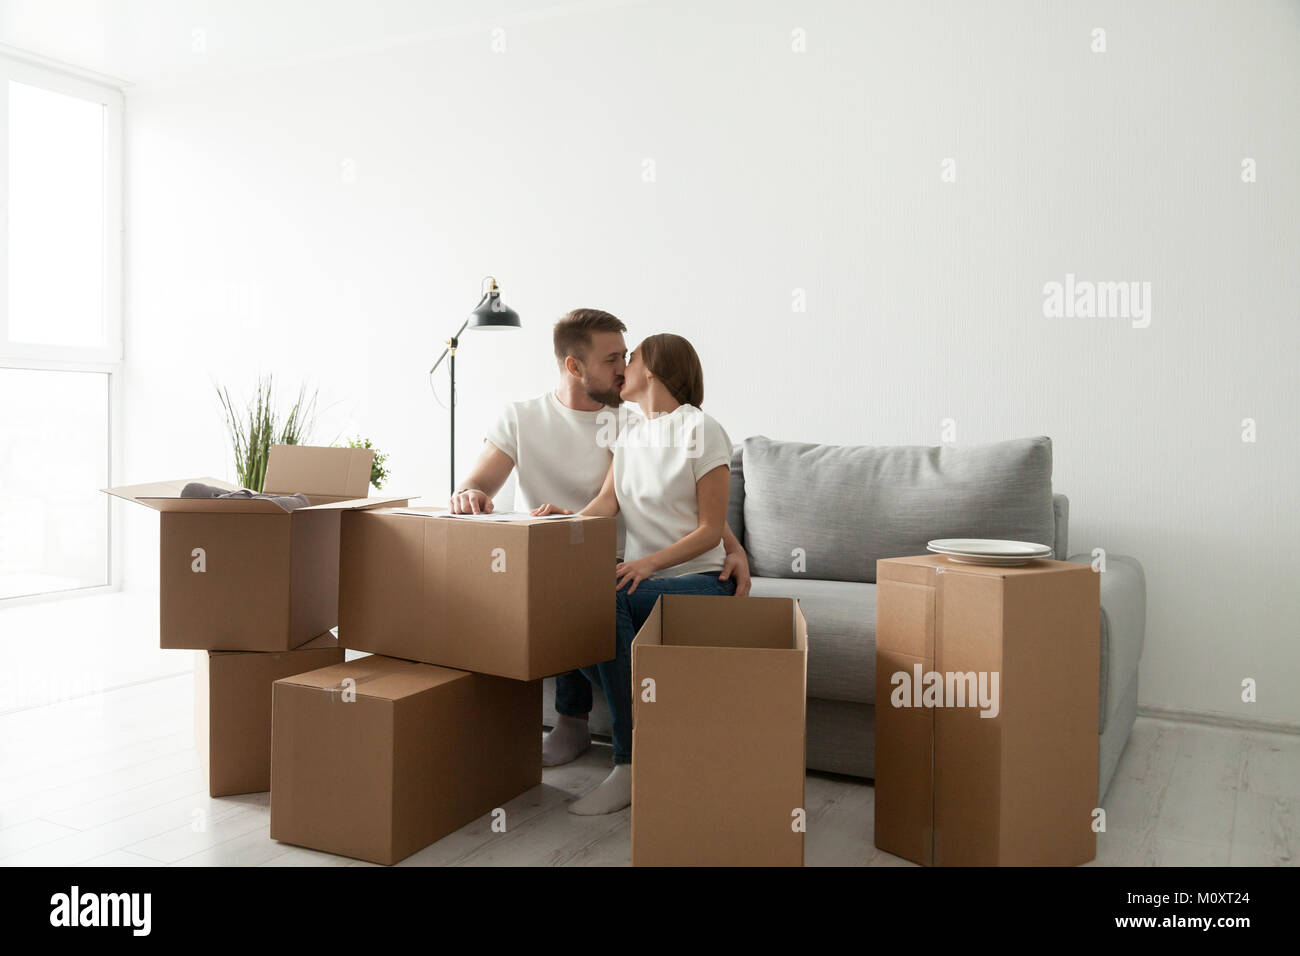 Couple sitting on sofa in living room with boxes Banque D'Images